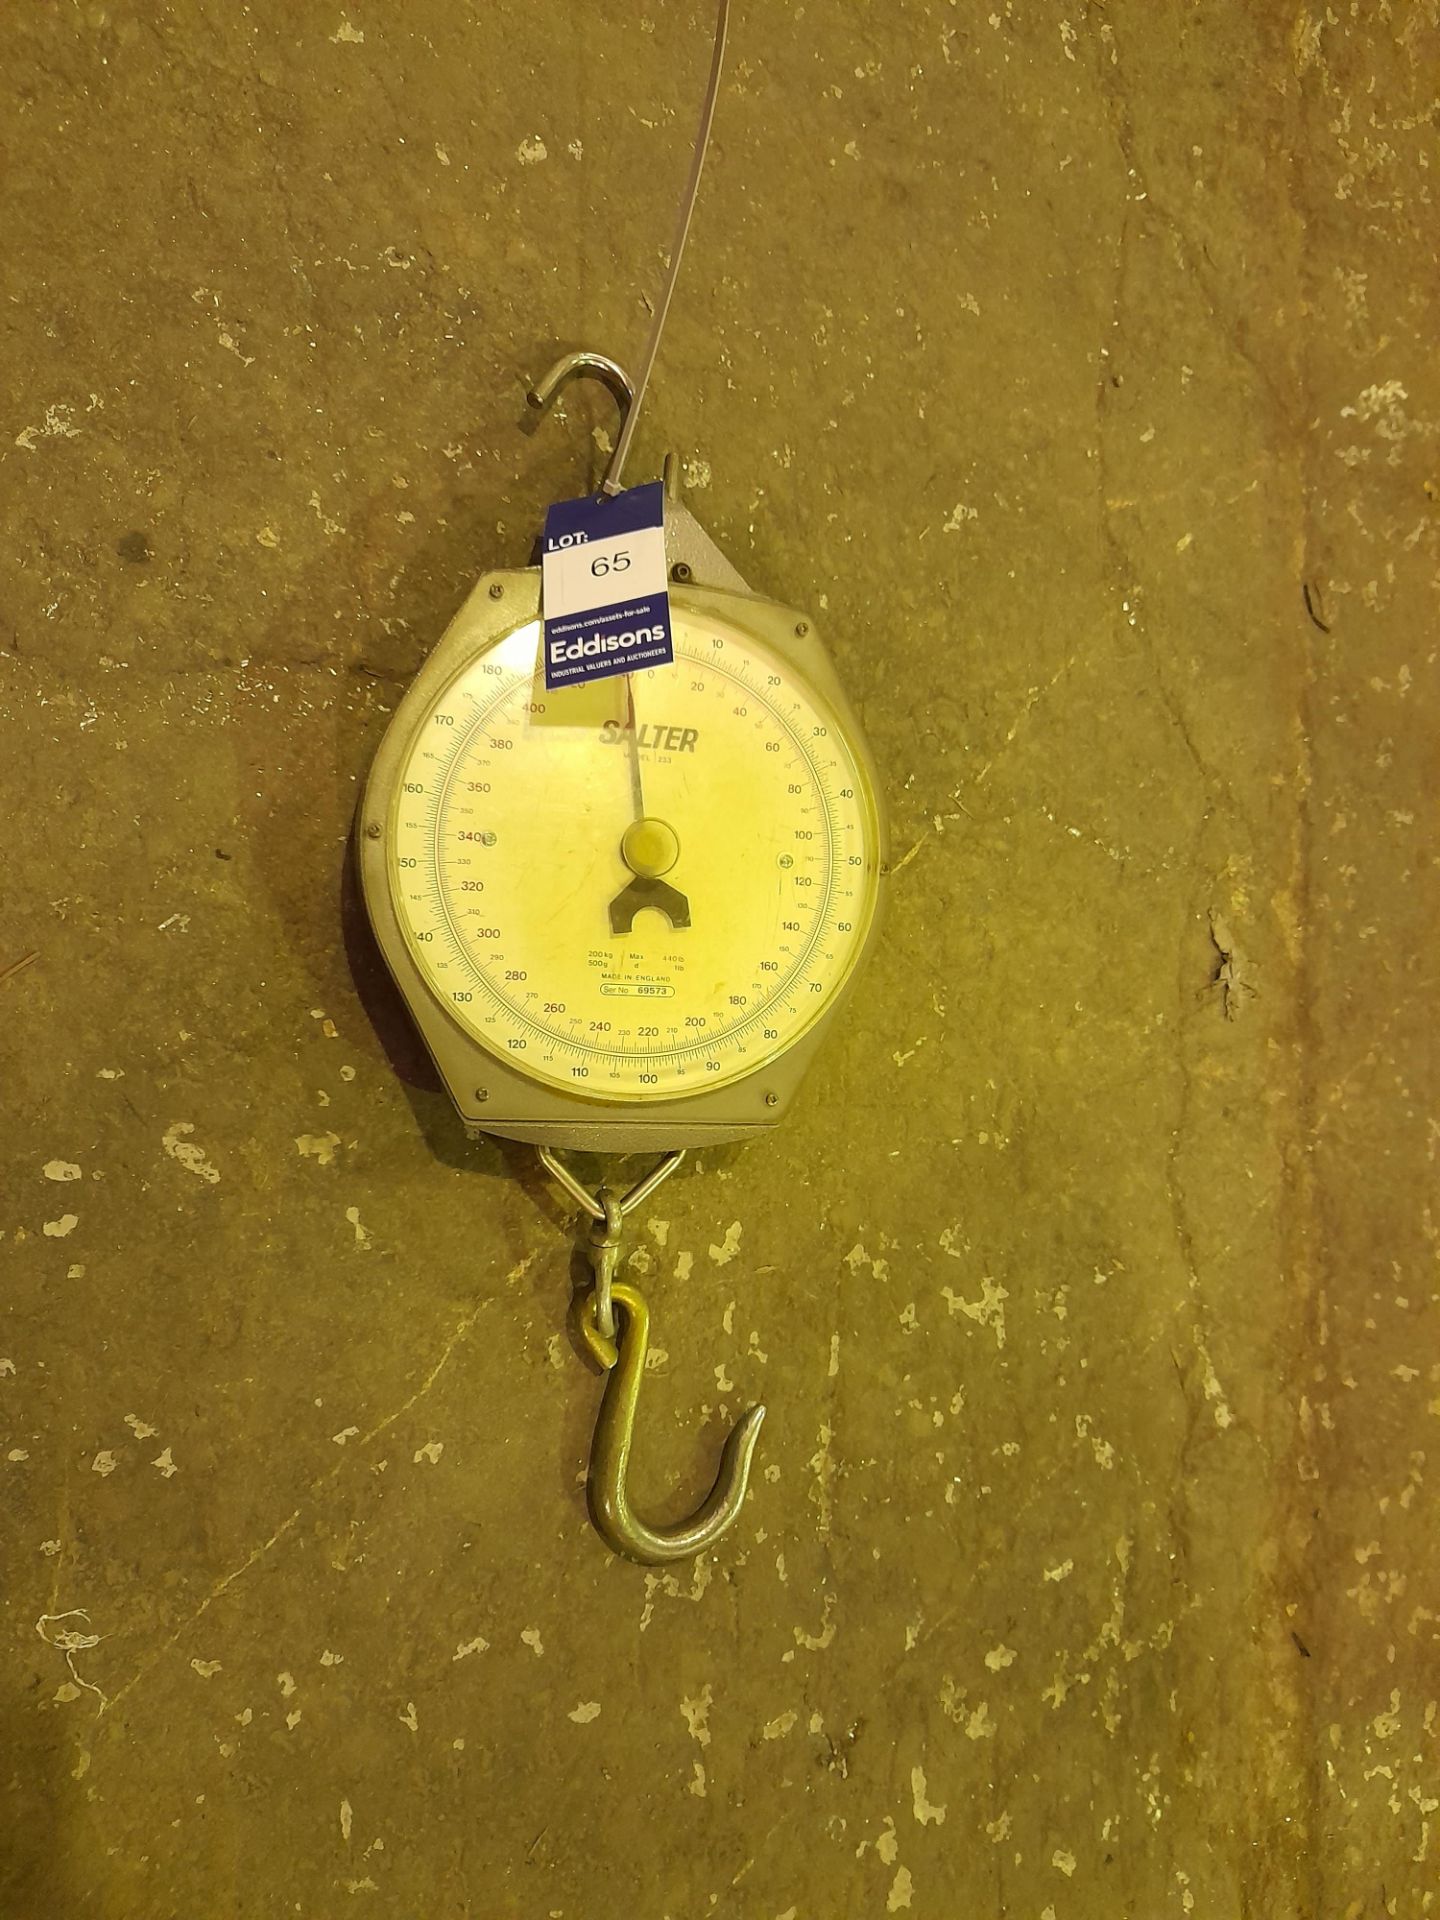 Salter hanging scales